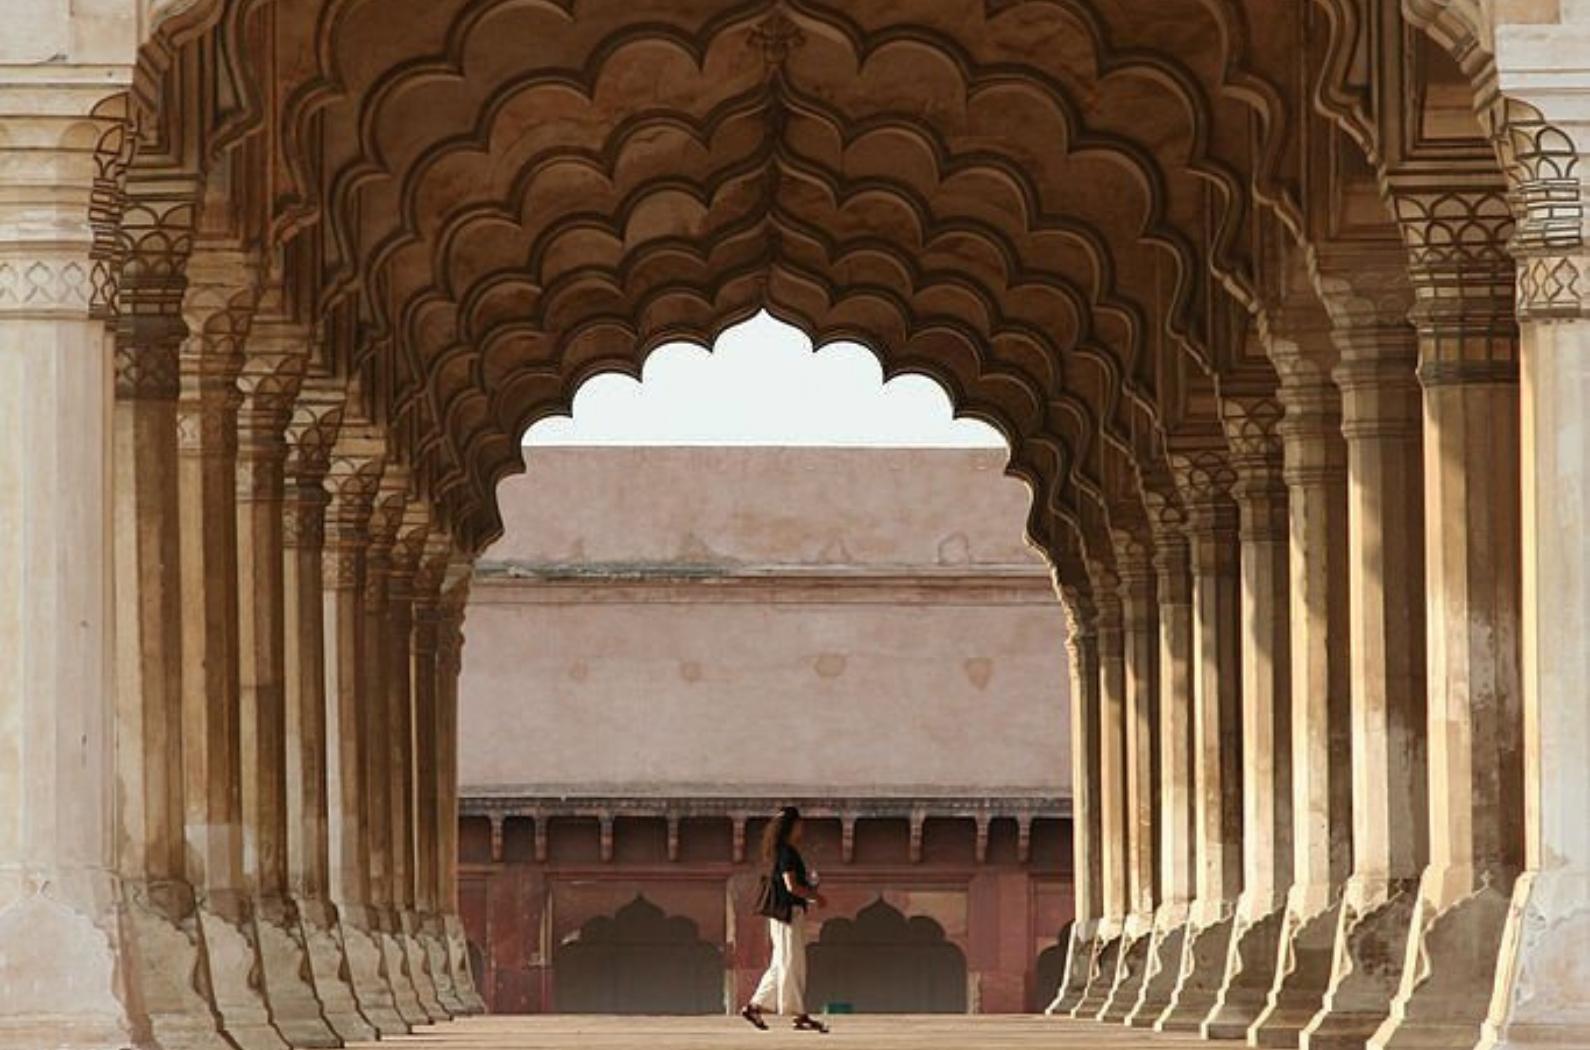 Tourist sightseeing inside the arches of Agra Fort